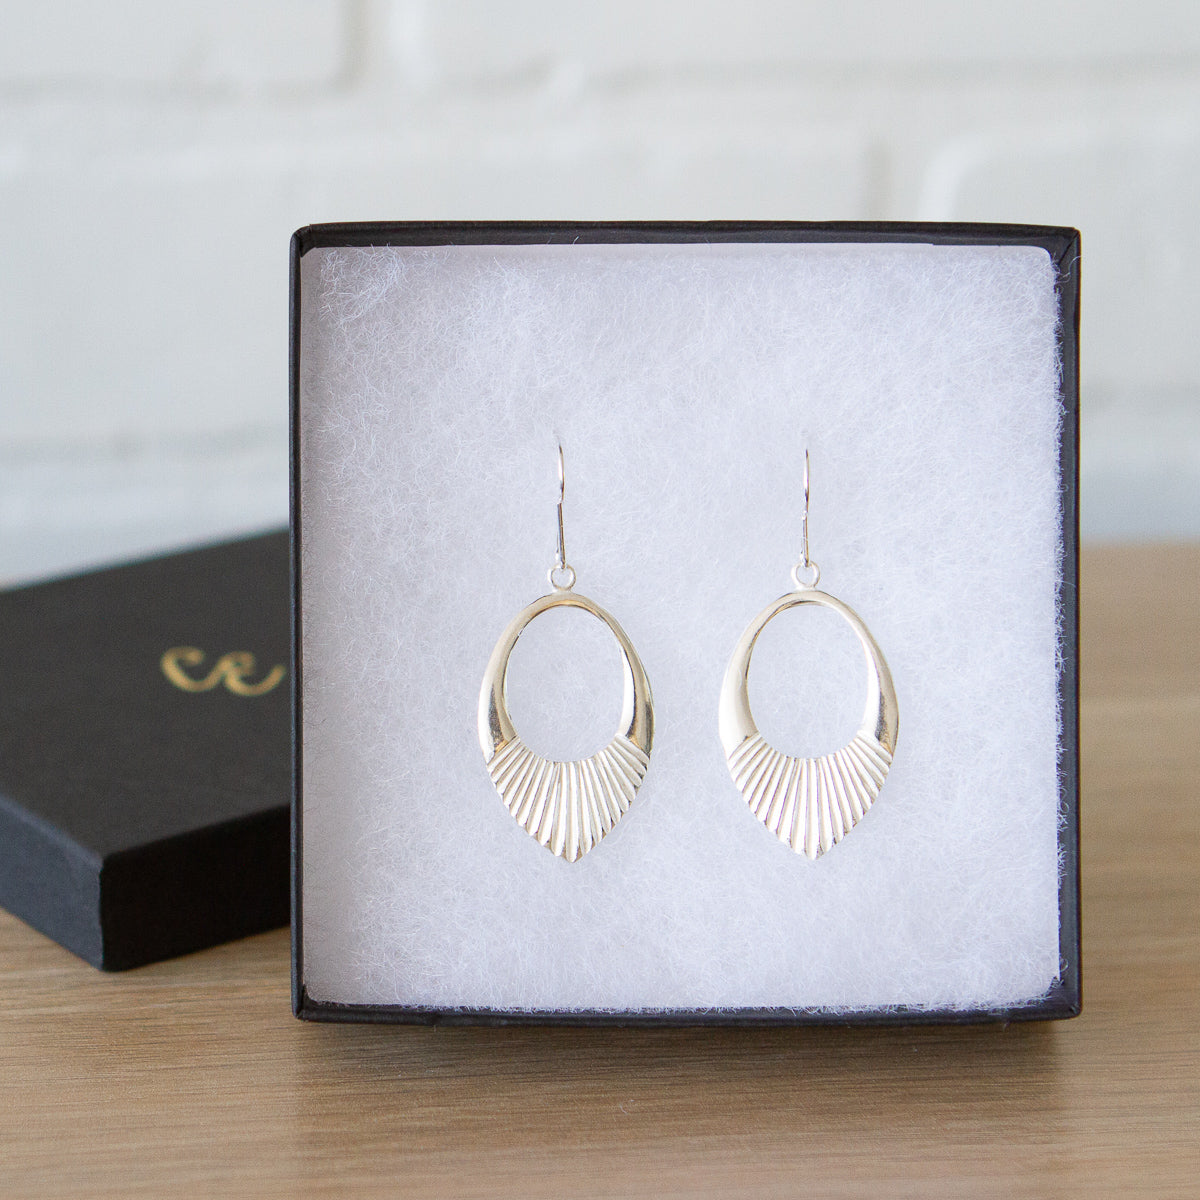 Silver Medium open petal shape earrings with textured bottoms in a gift box